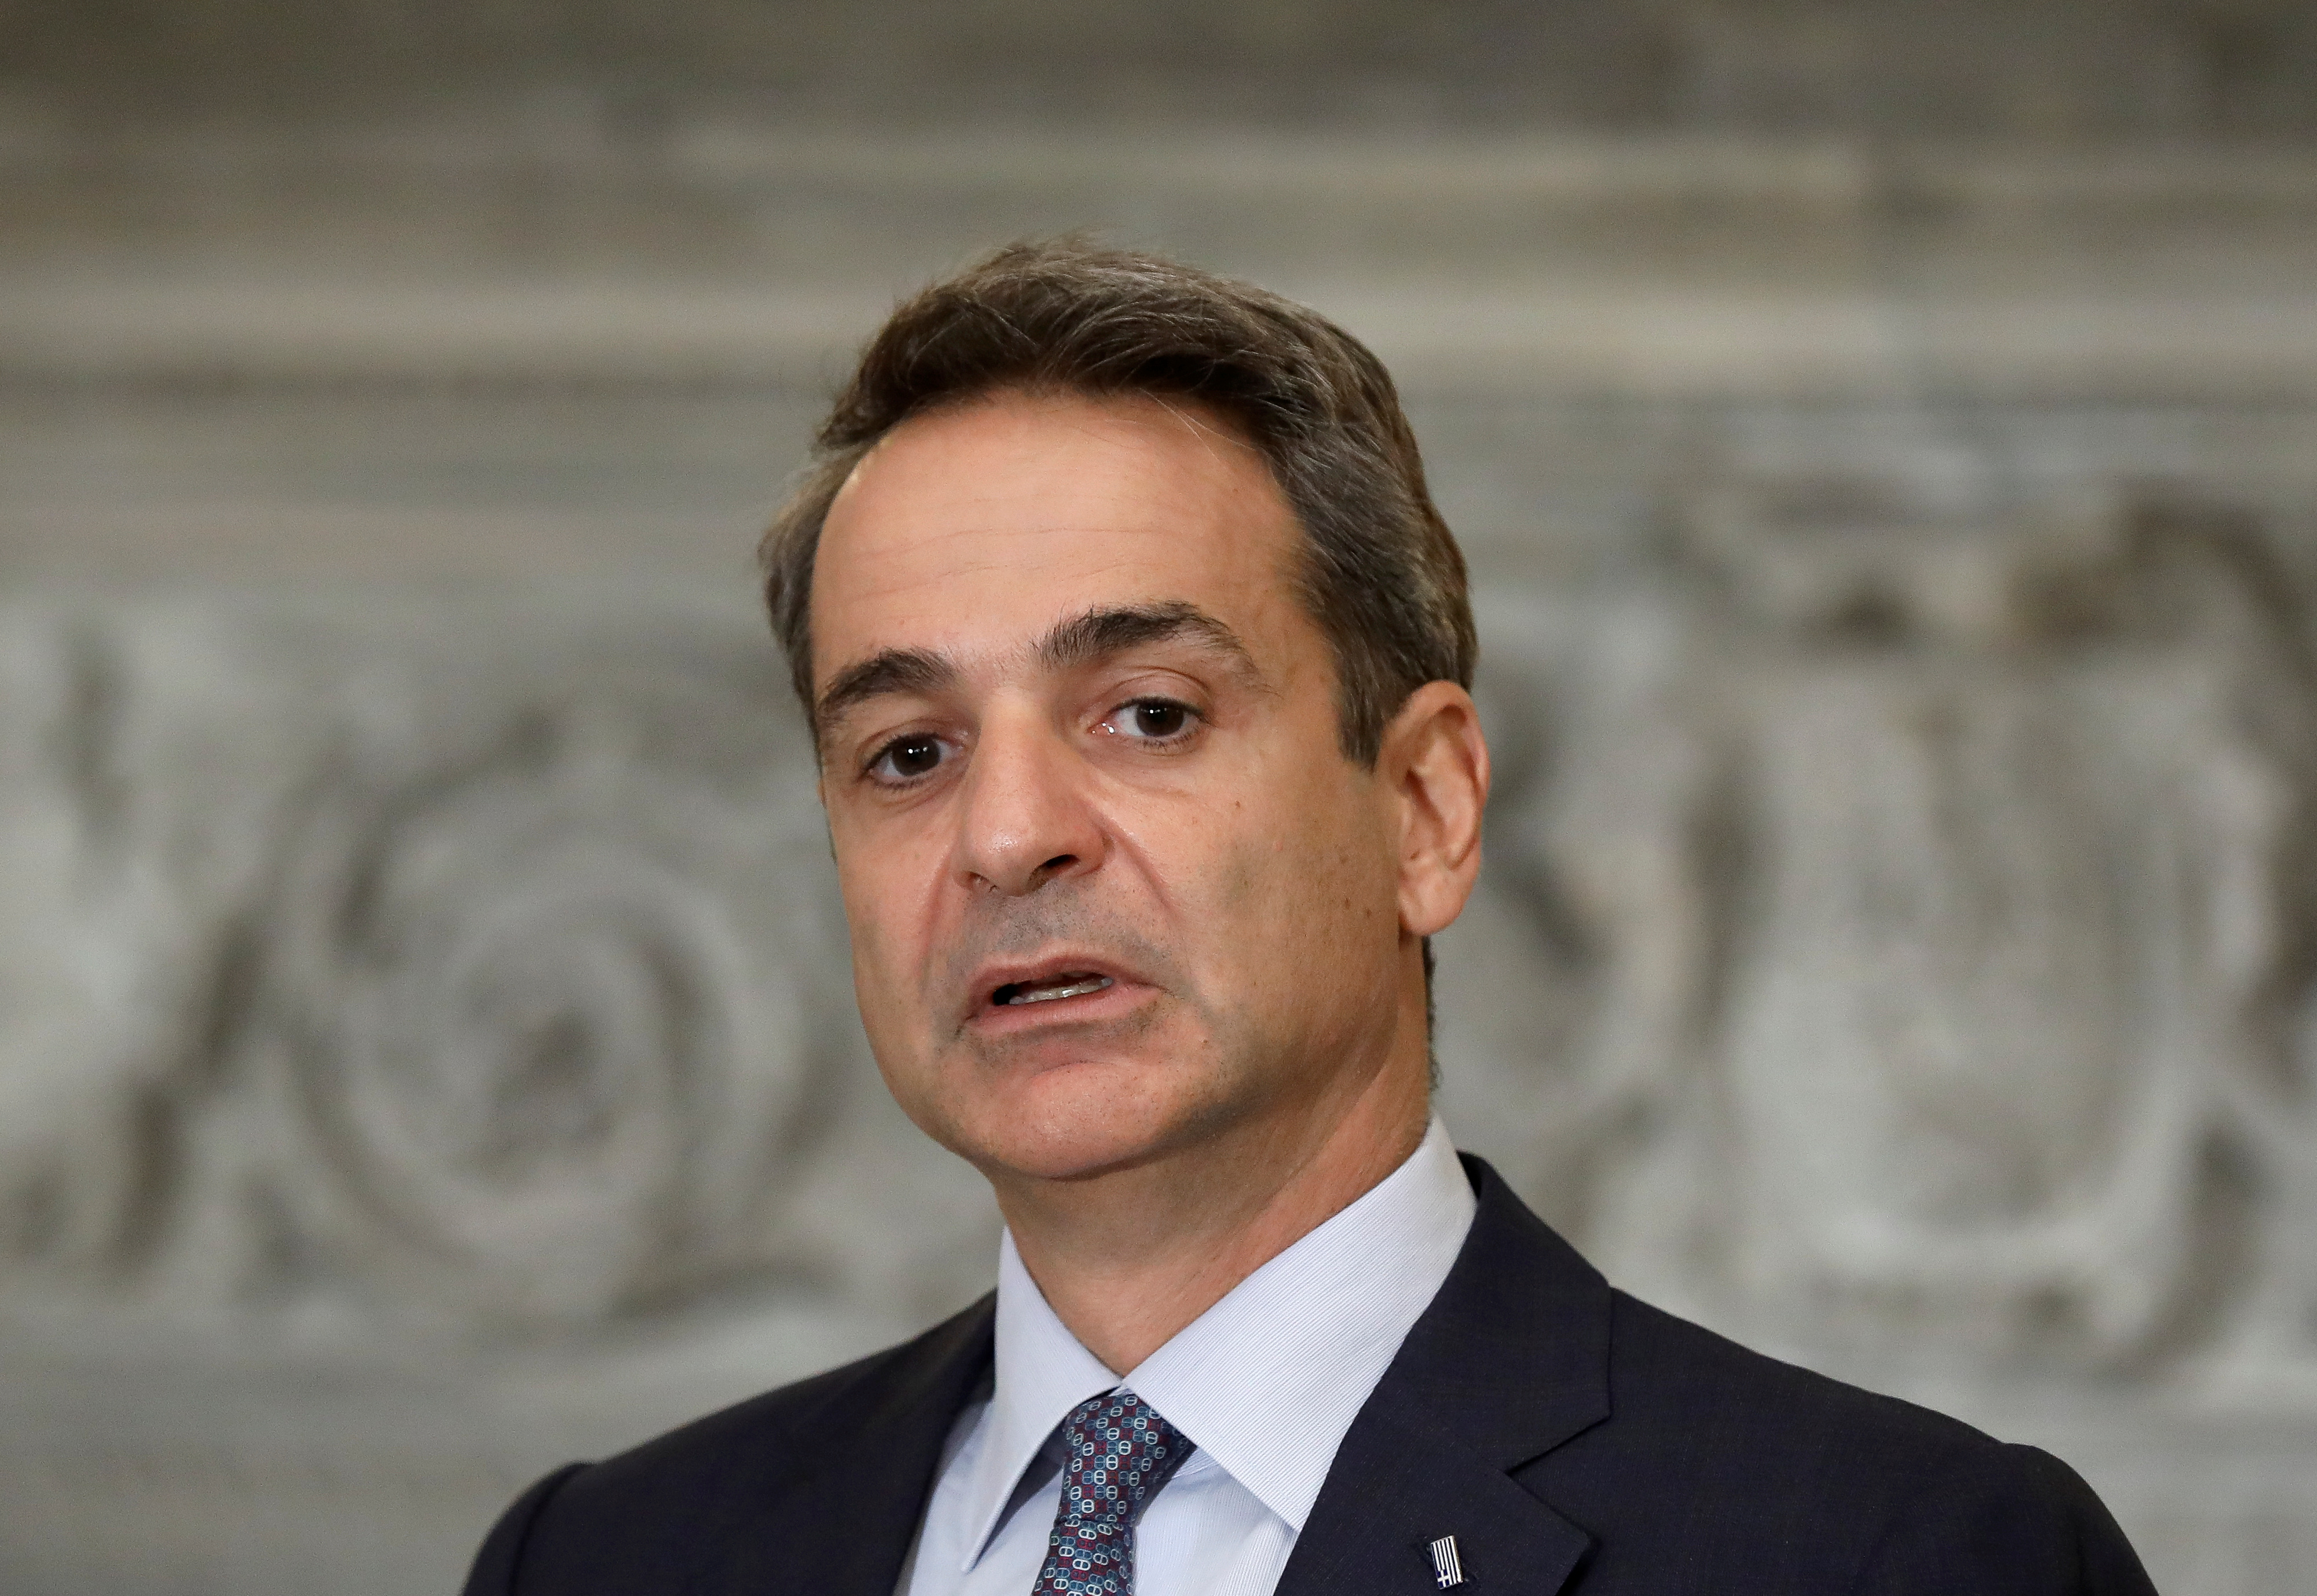 EU Council President Michel meets with Greek PM Mitsotakis in Athens